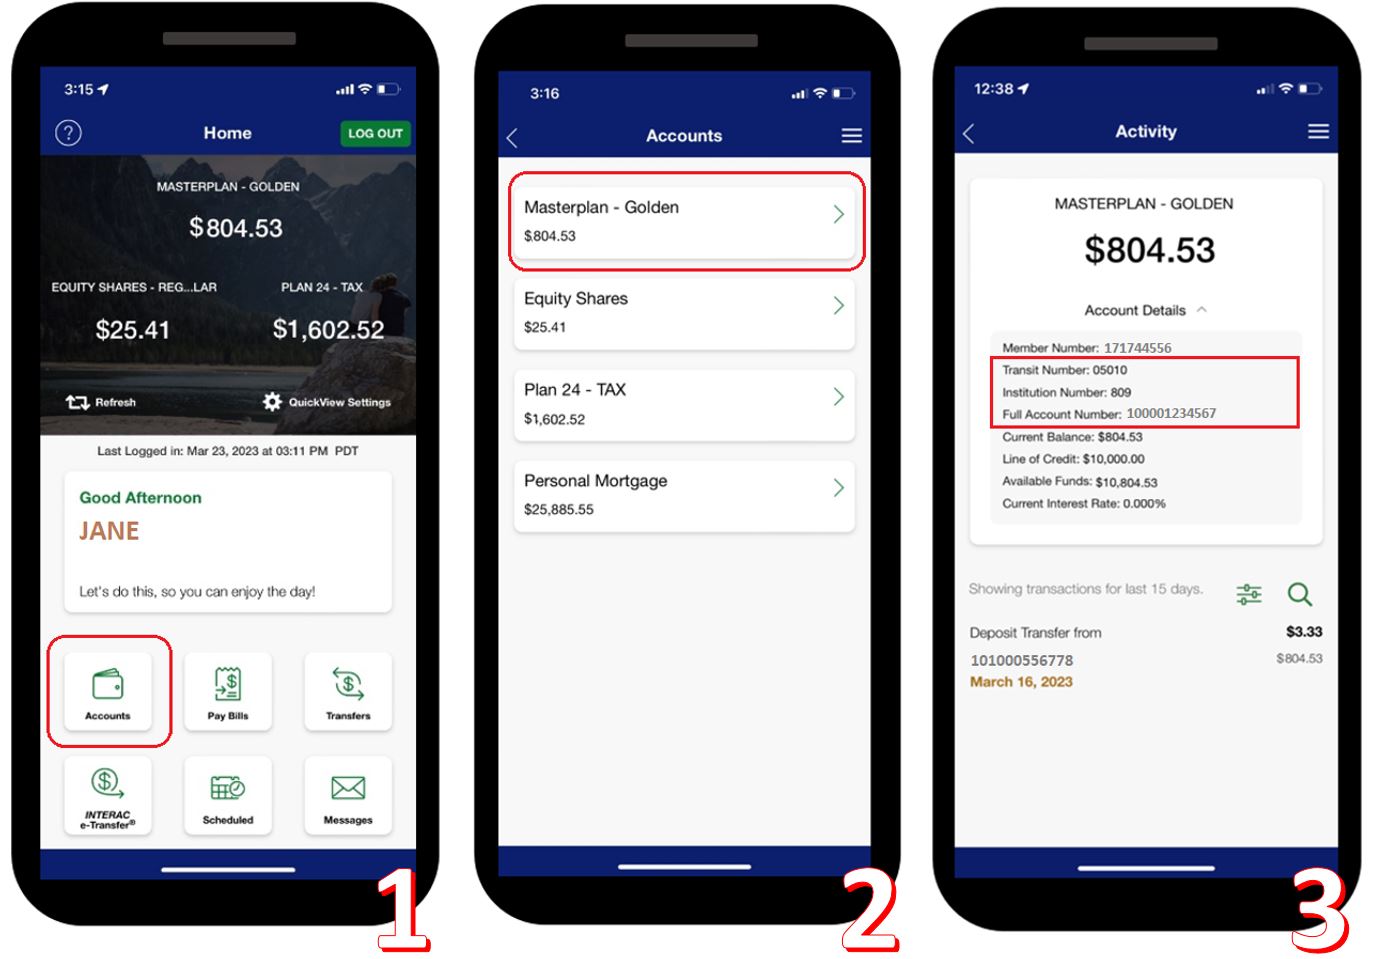 How to find your account information in the mobile app